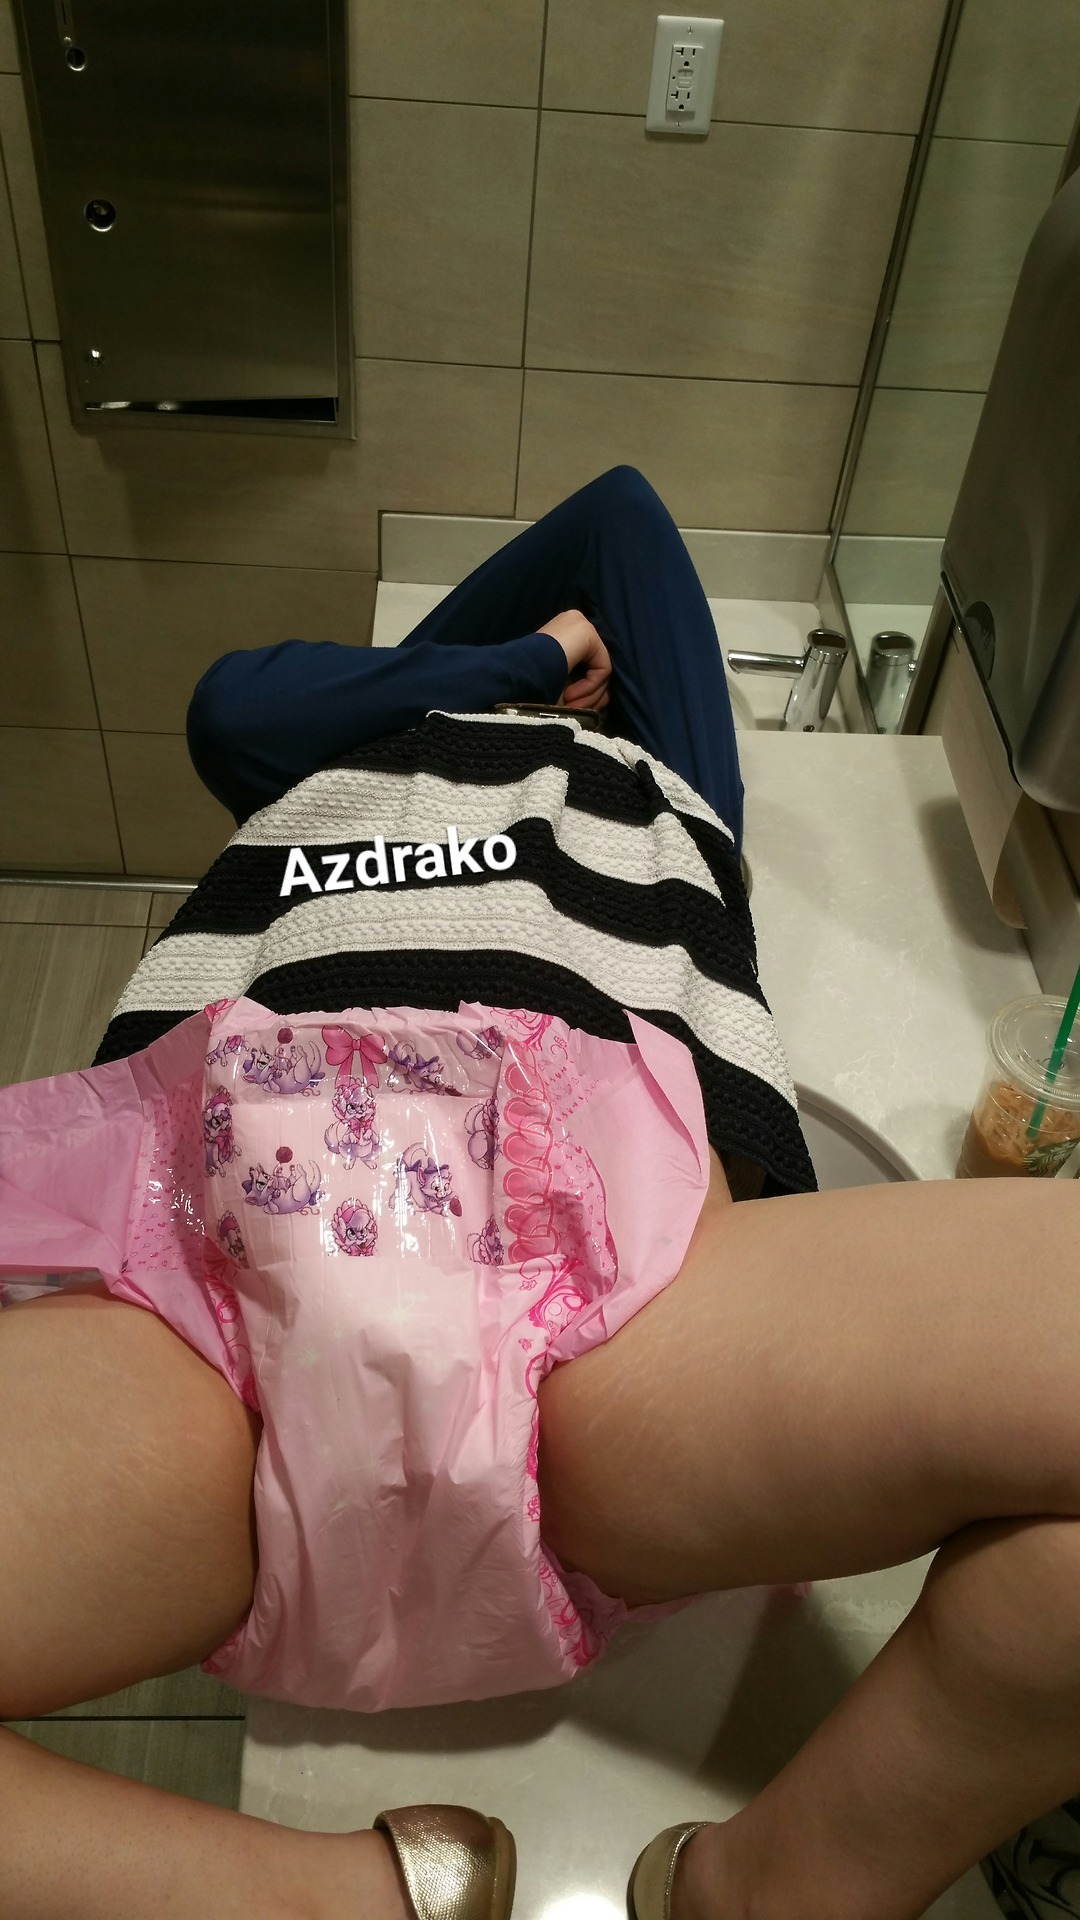 azdrako:  I forced baby cat into the family restroom and pulled up her skirt. Her